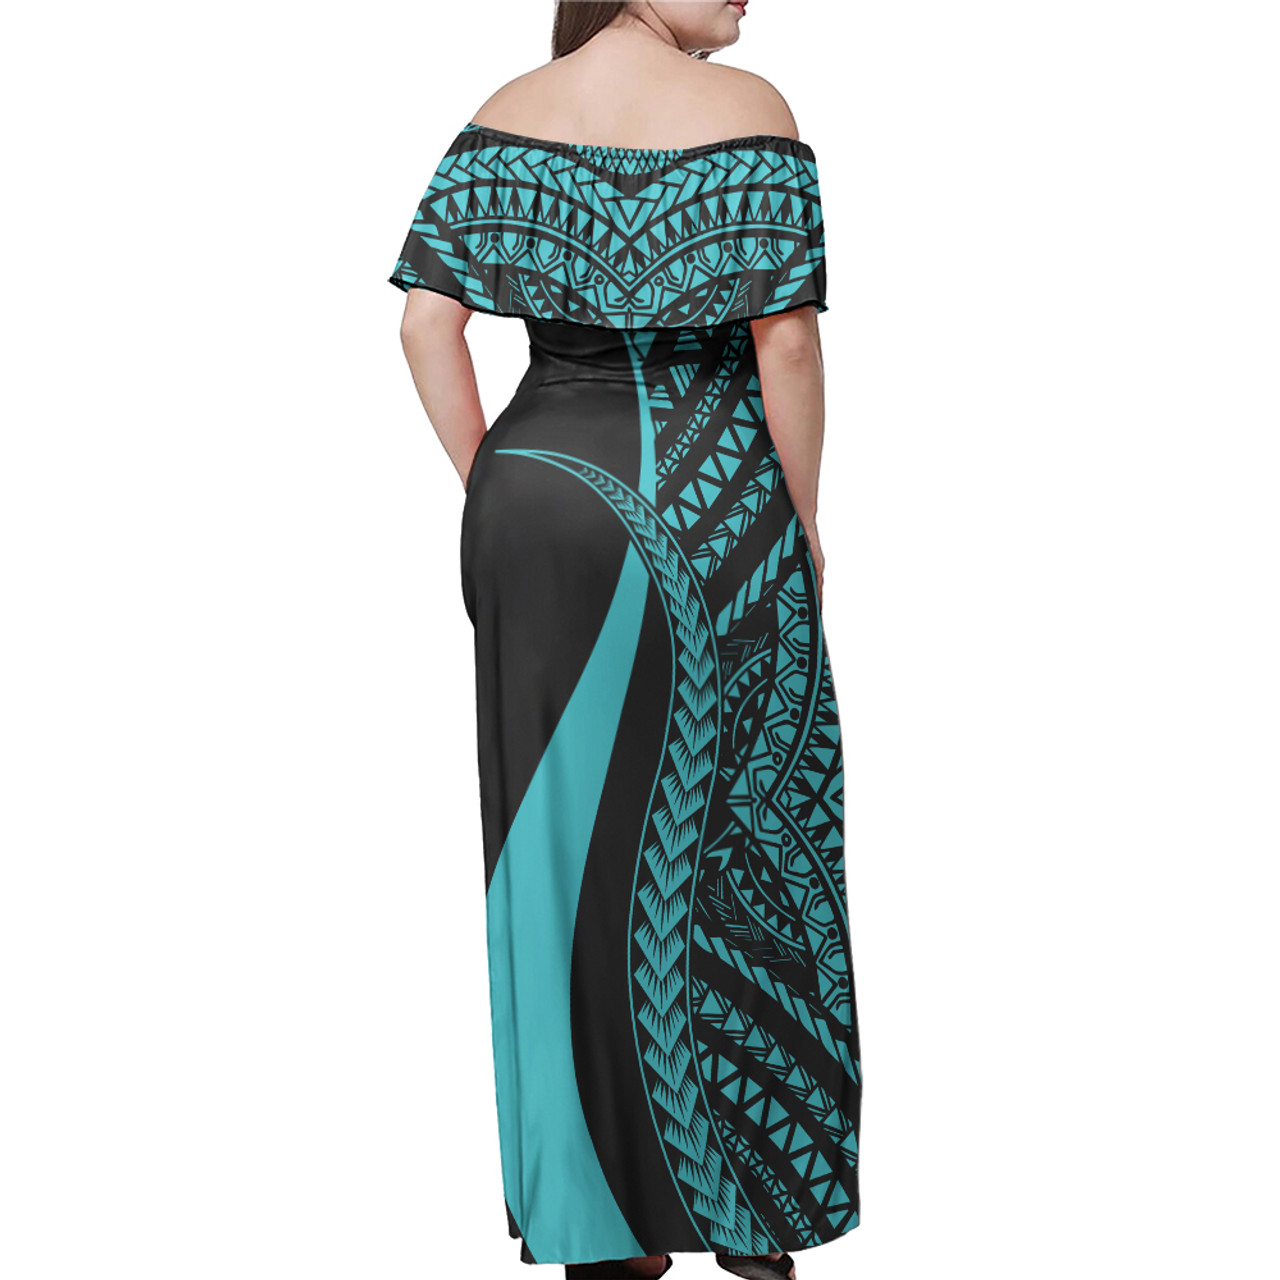 Yap Combo Dress And Shirt - Micronesian Tentacle Tribal Pattern Turquoise